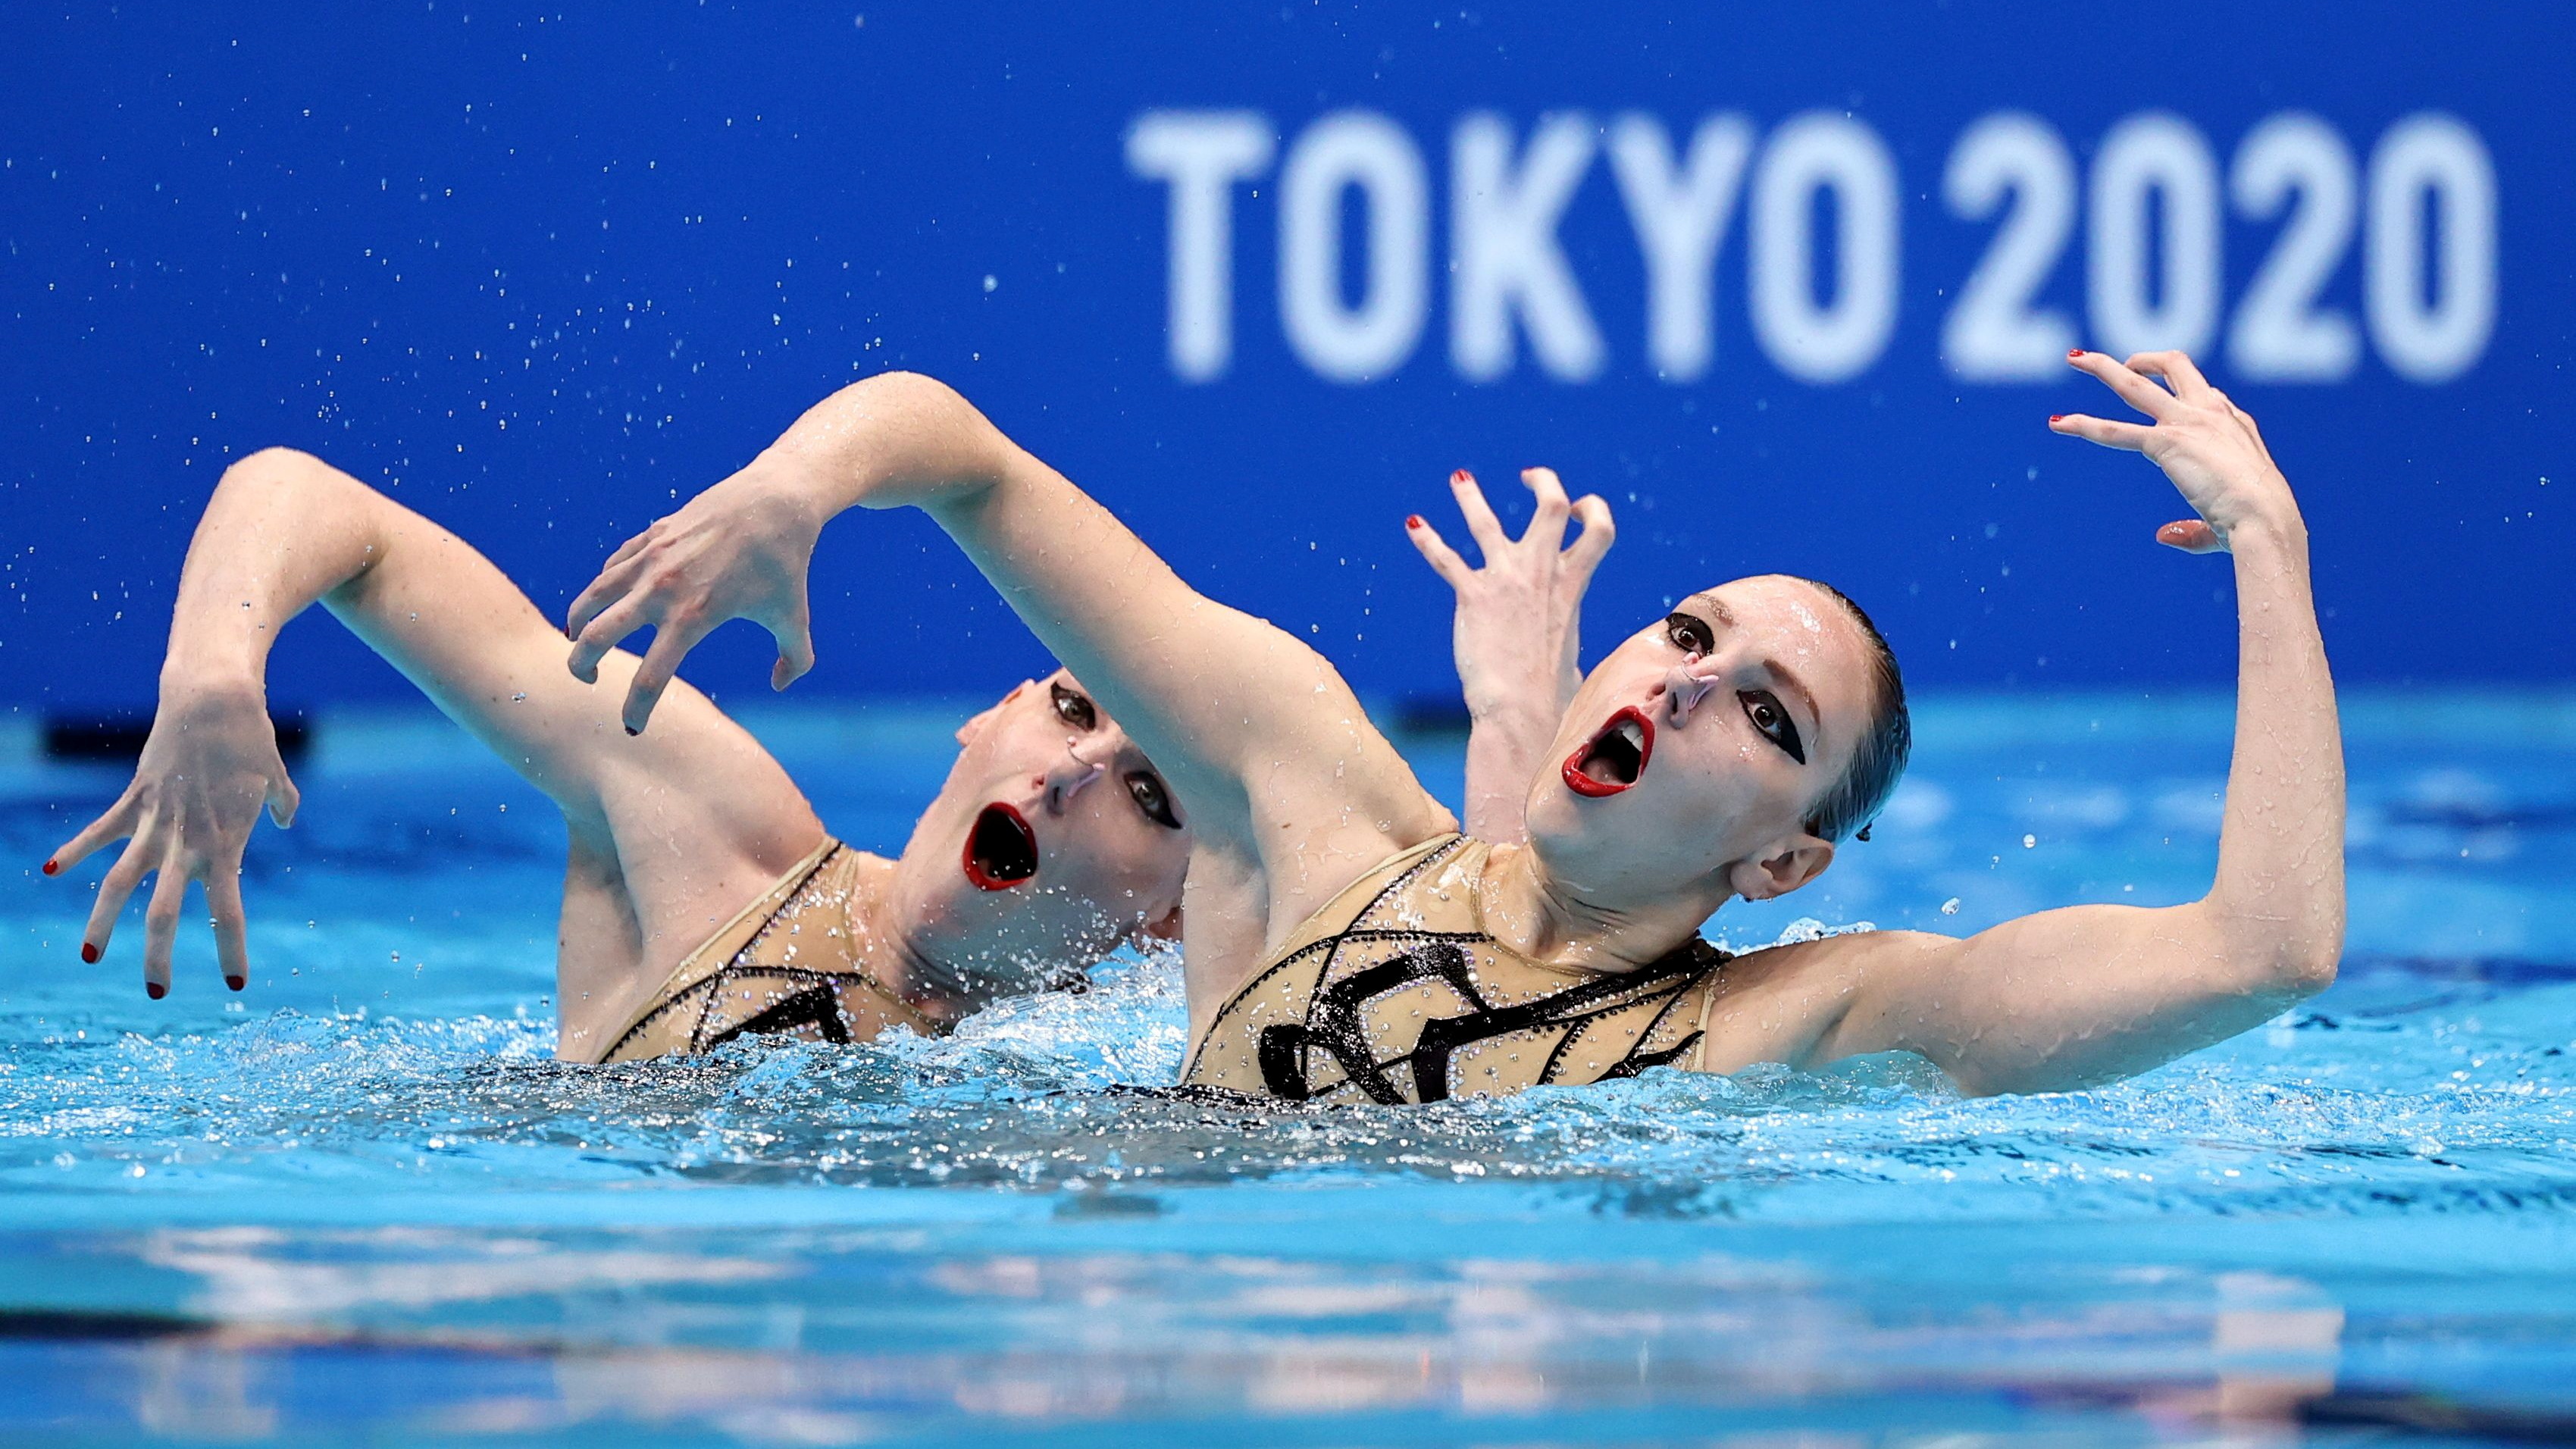 Olympic triumph, Record-breaking gold, Synchronized dominance, Russian synchronicity, 3400x1920 HD Desktop